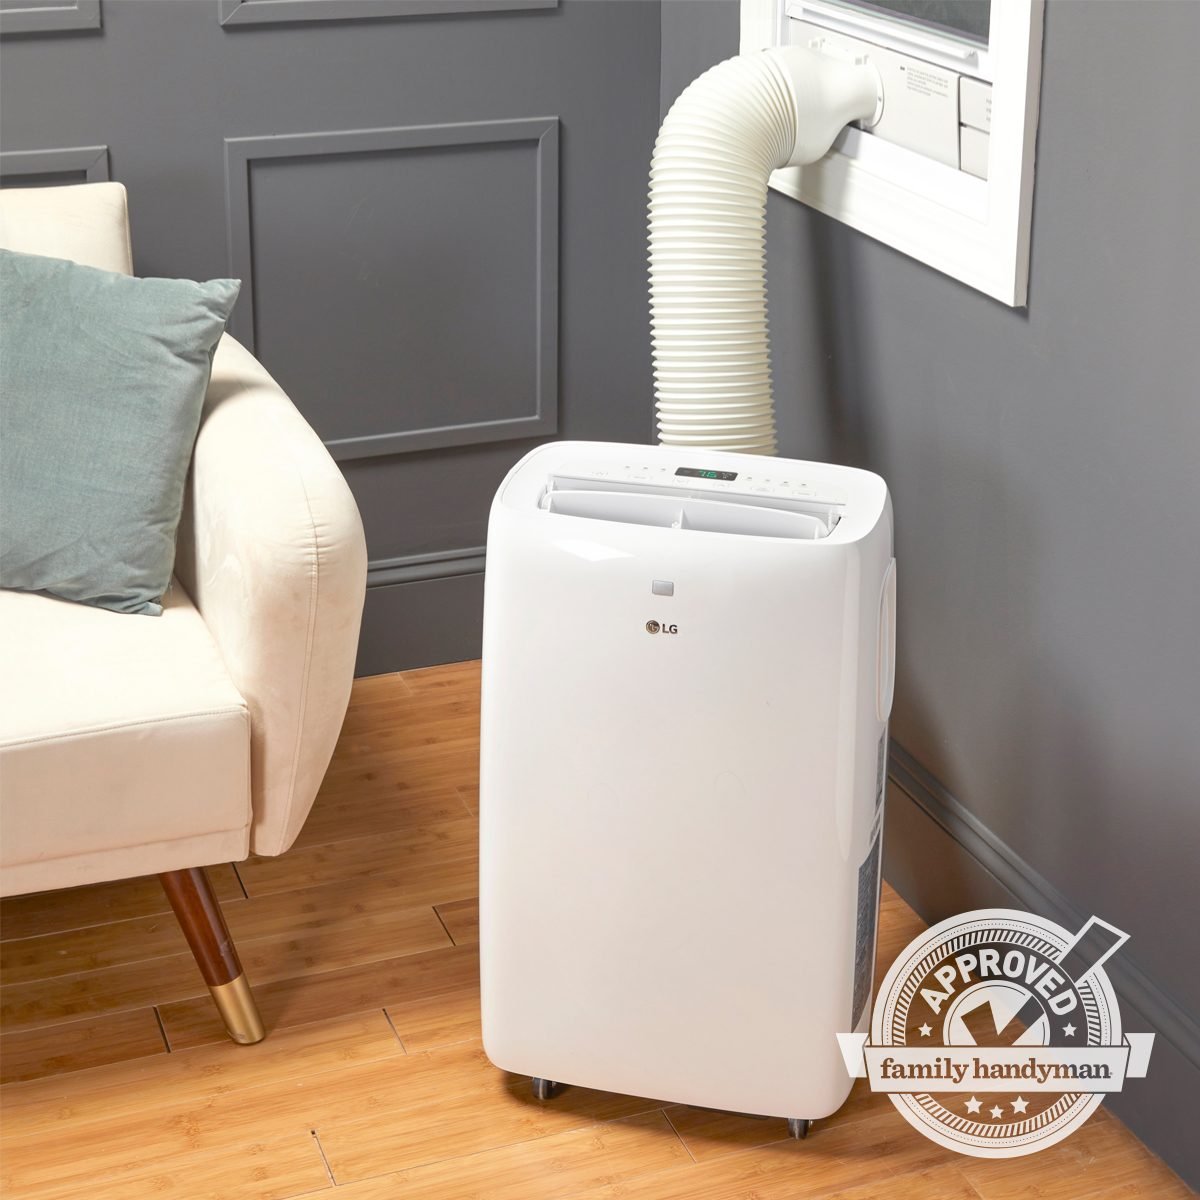 Portable LG Air Conditioner Review Stay Cool With This Floor A/C Unit